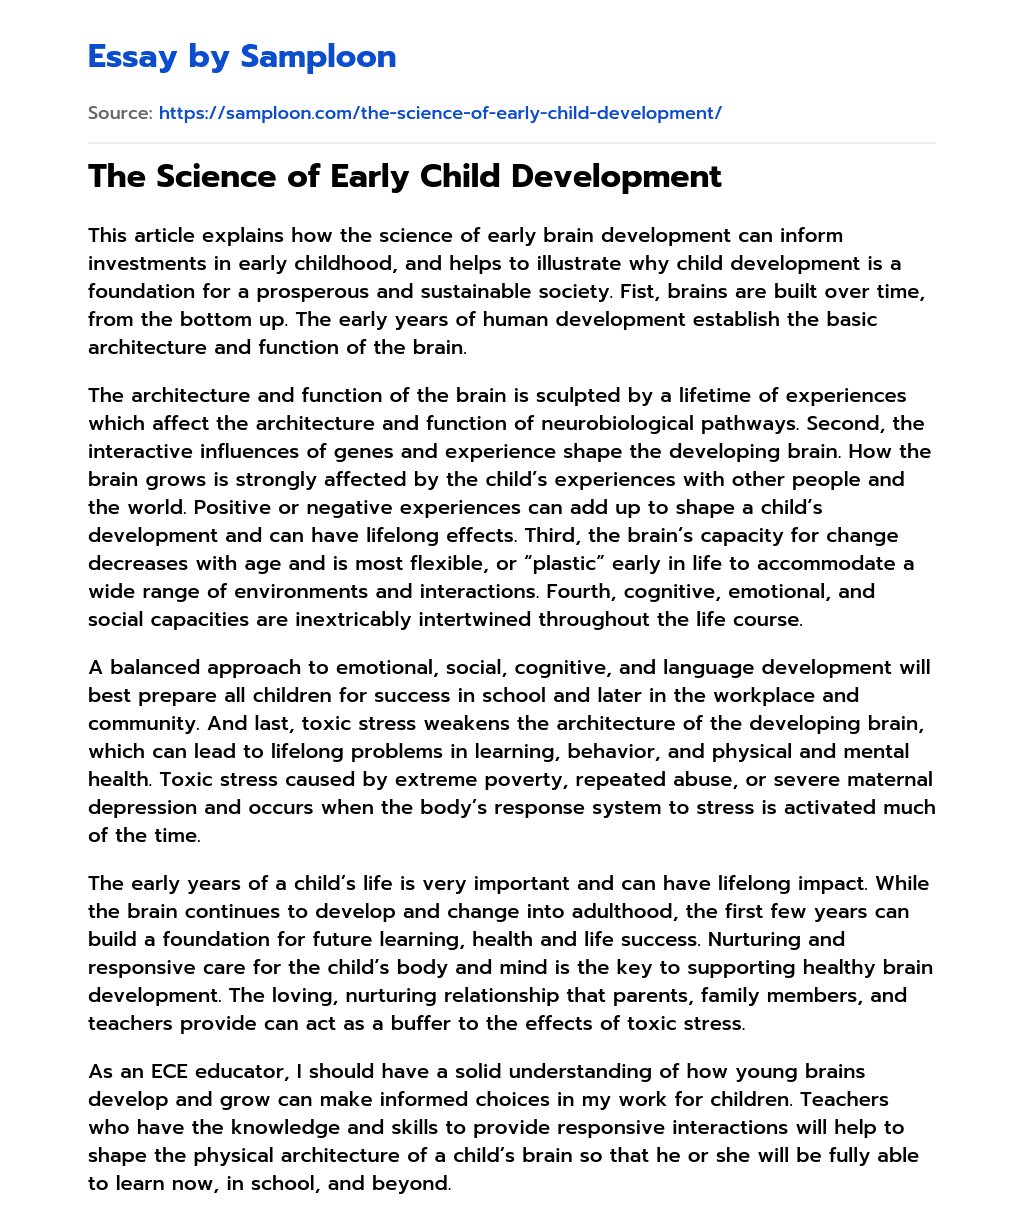 The Science of Early Child Development essay